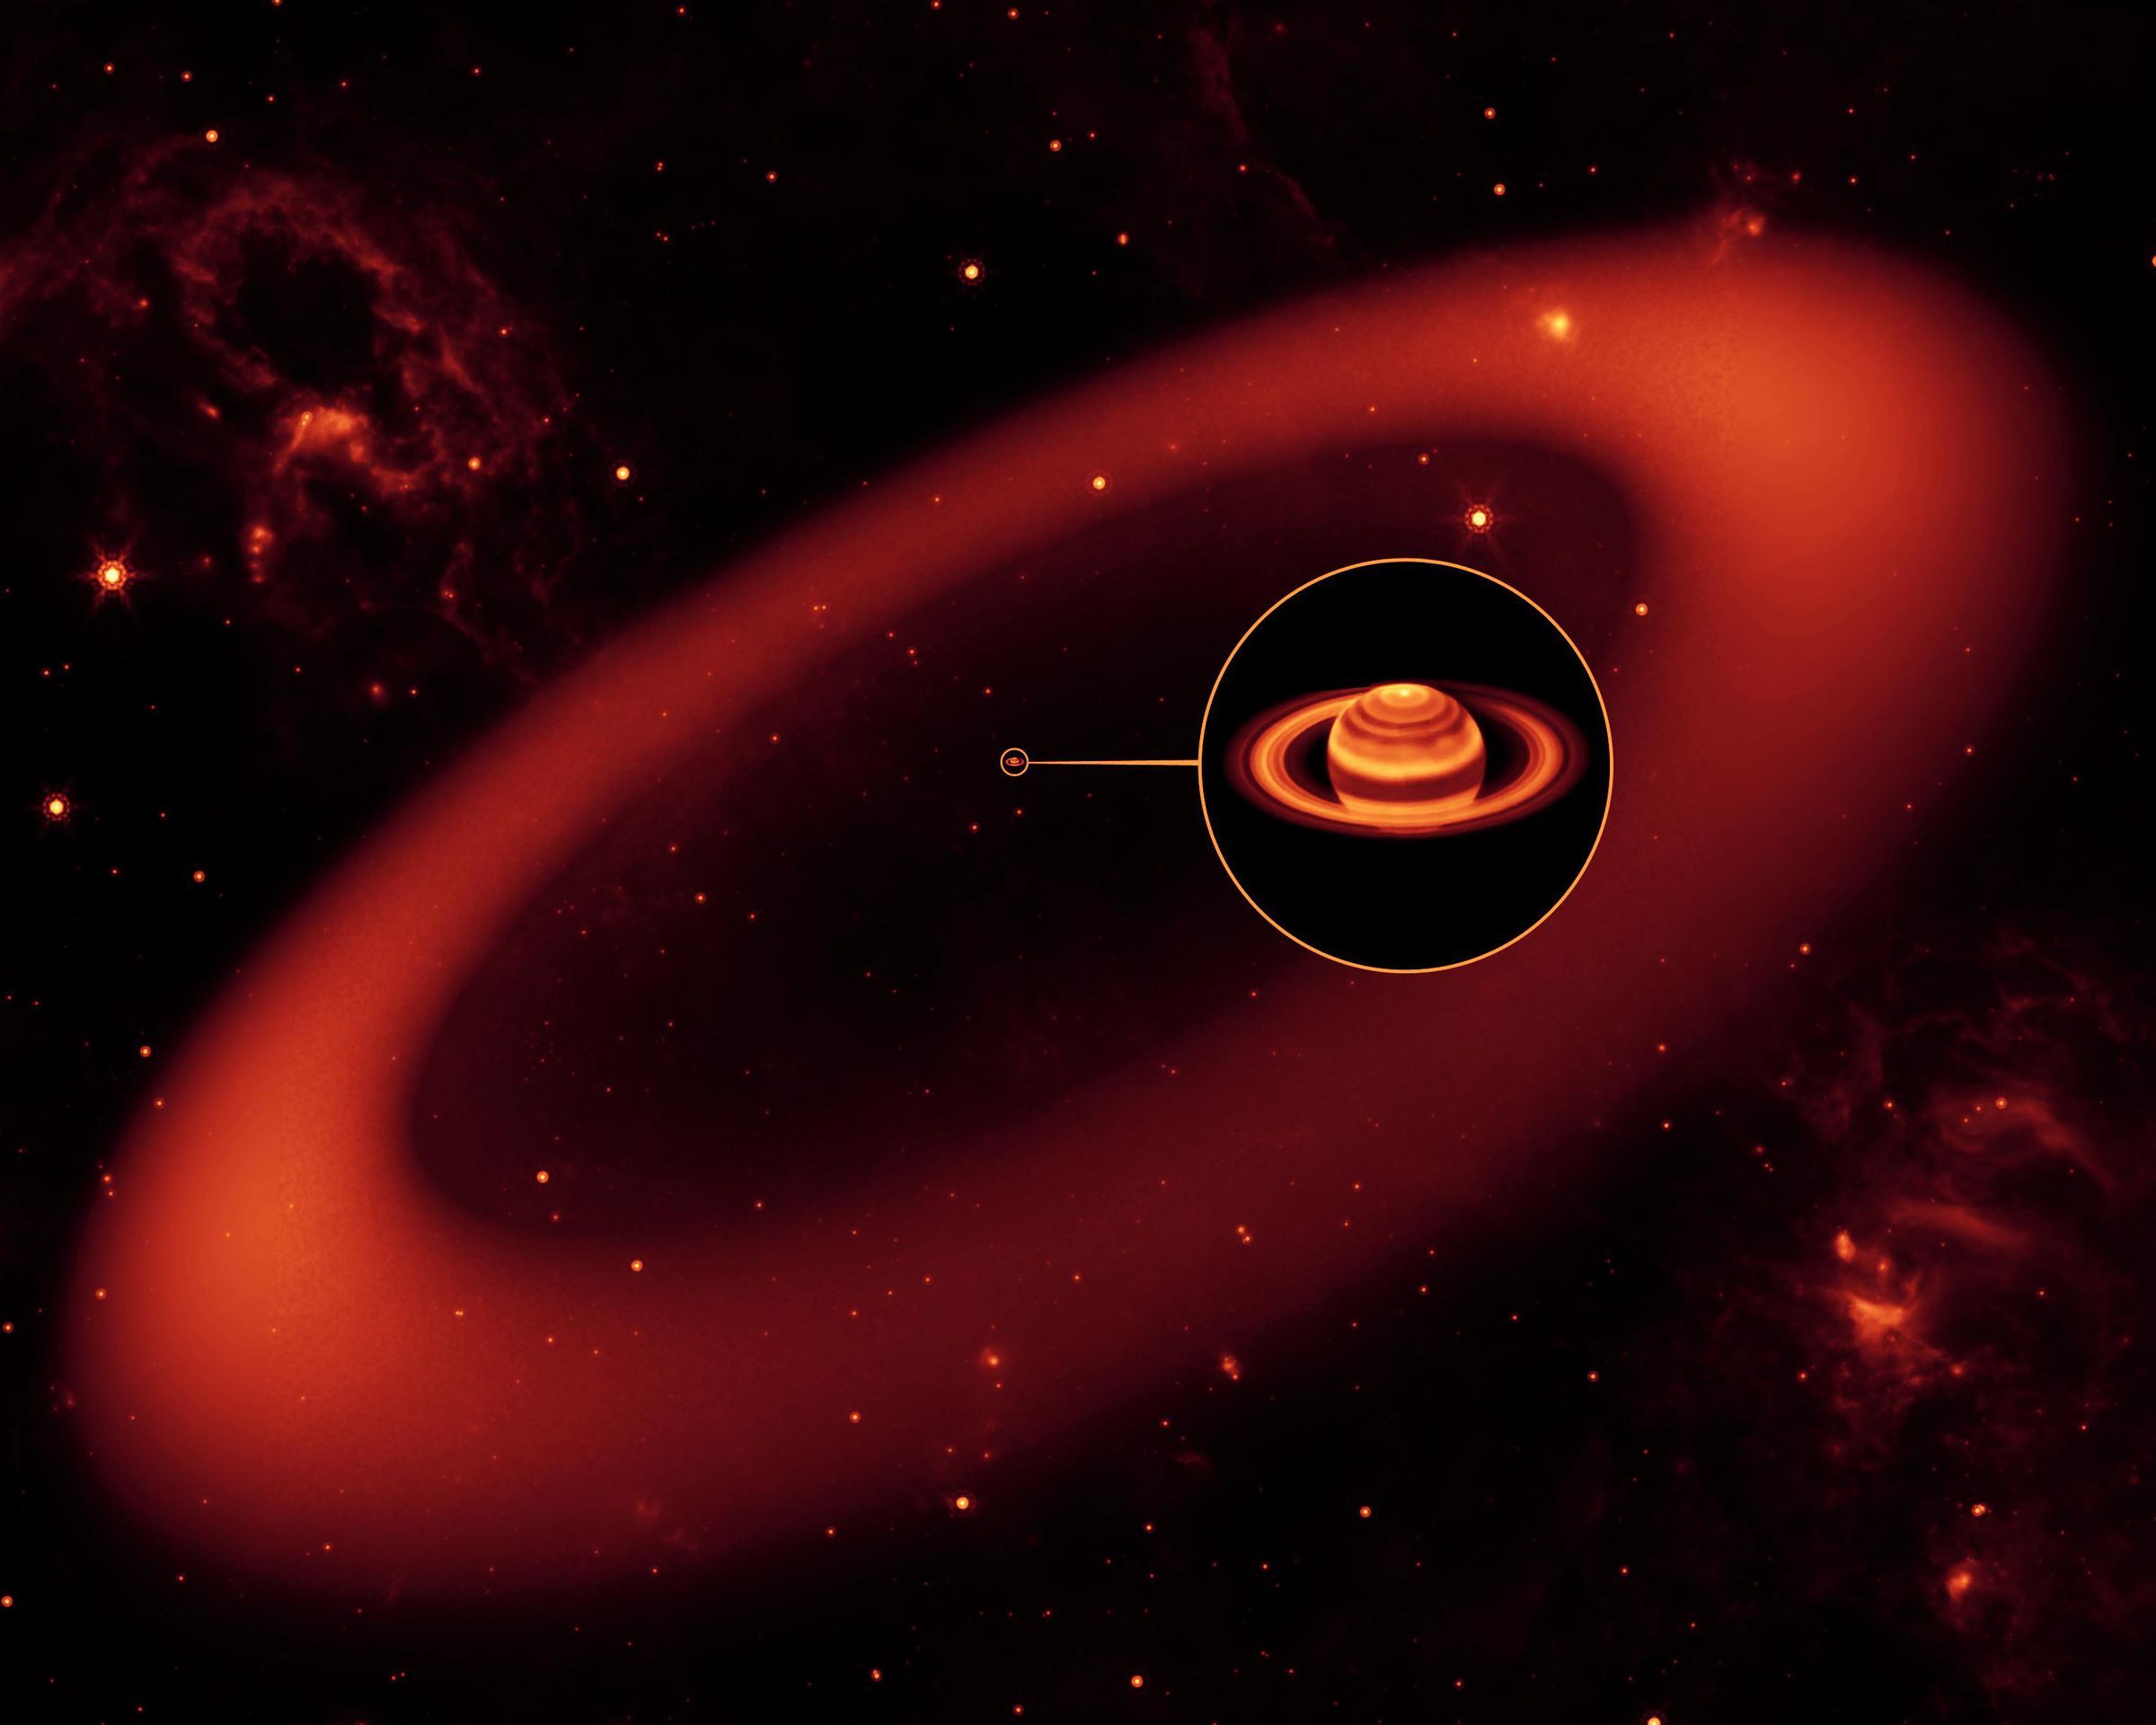 An artistic rendering of the invisible ring of Saturn, discovered by Spitzer